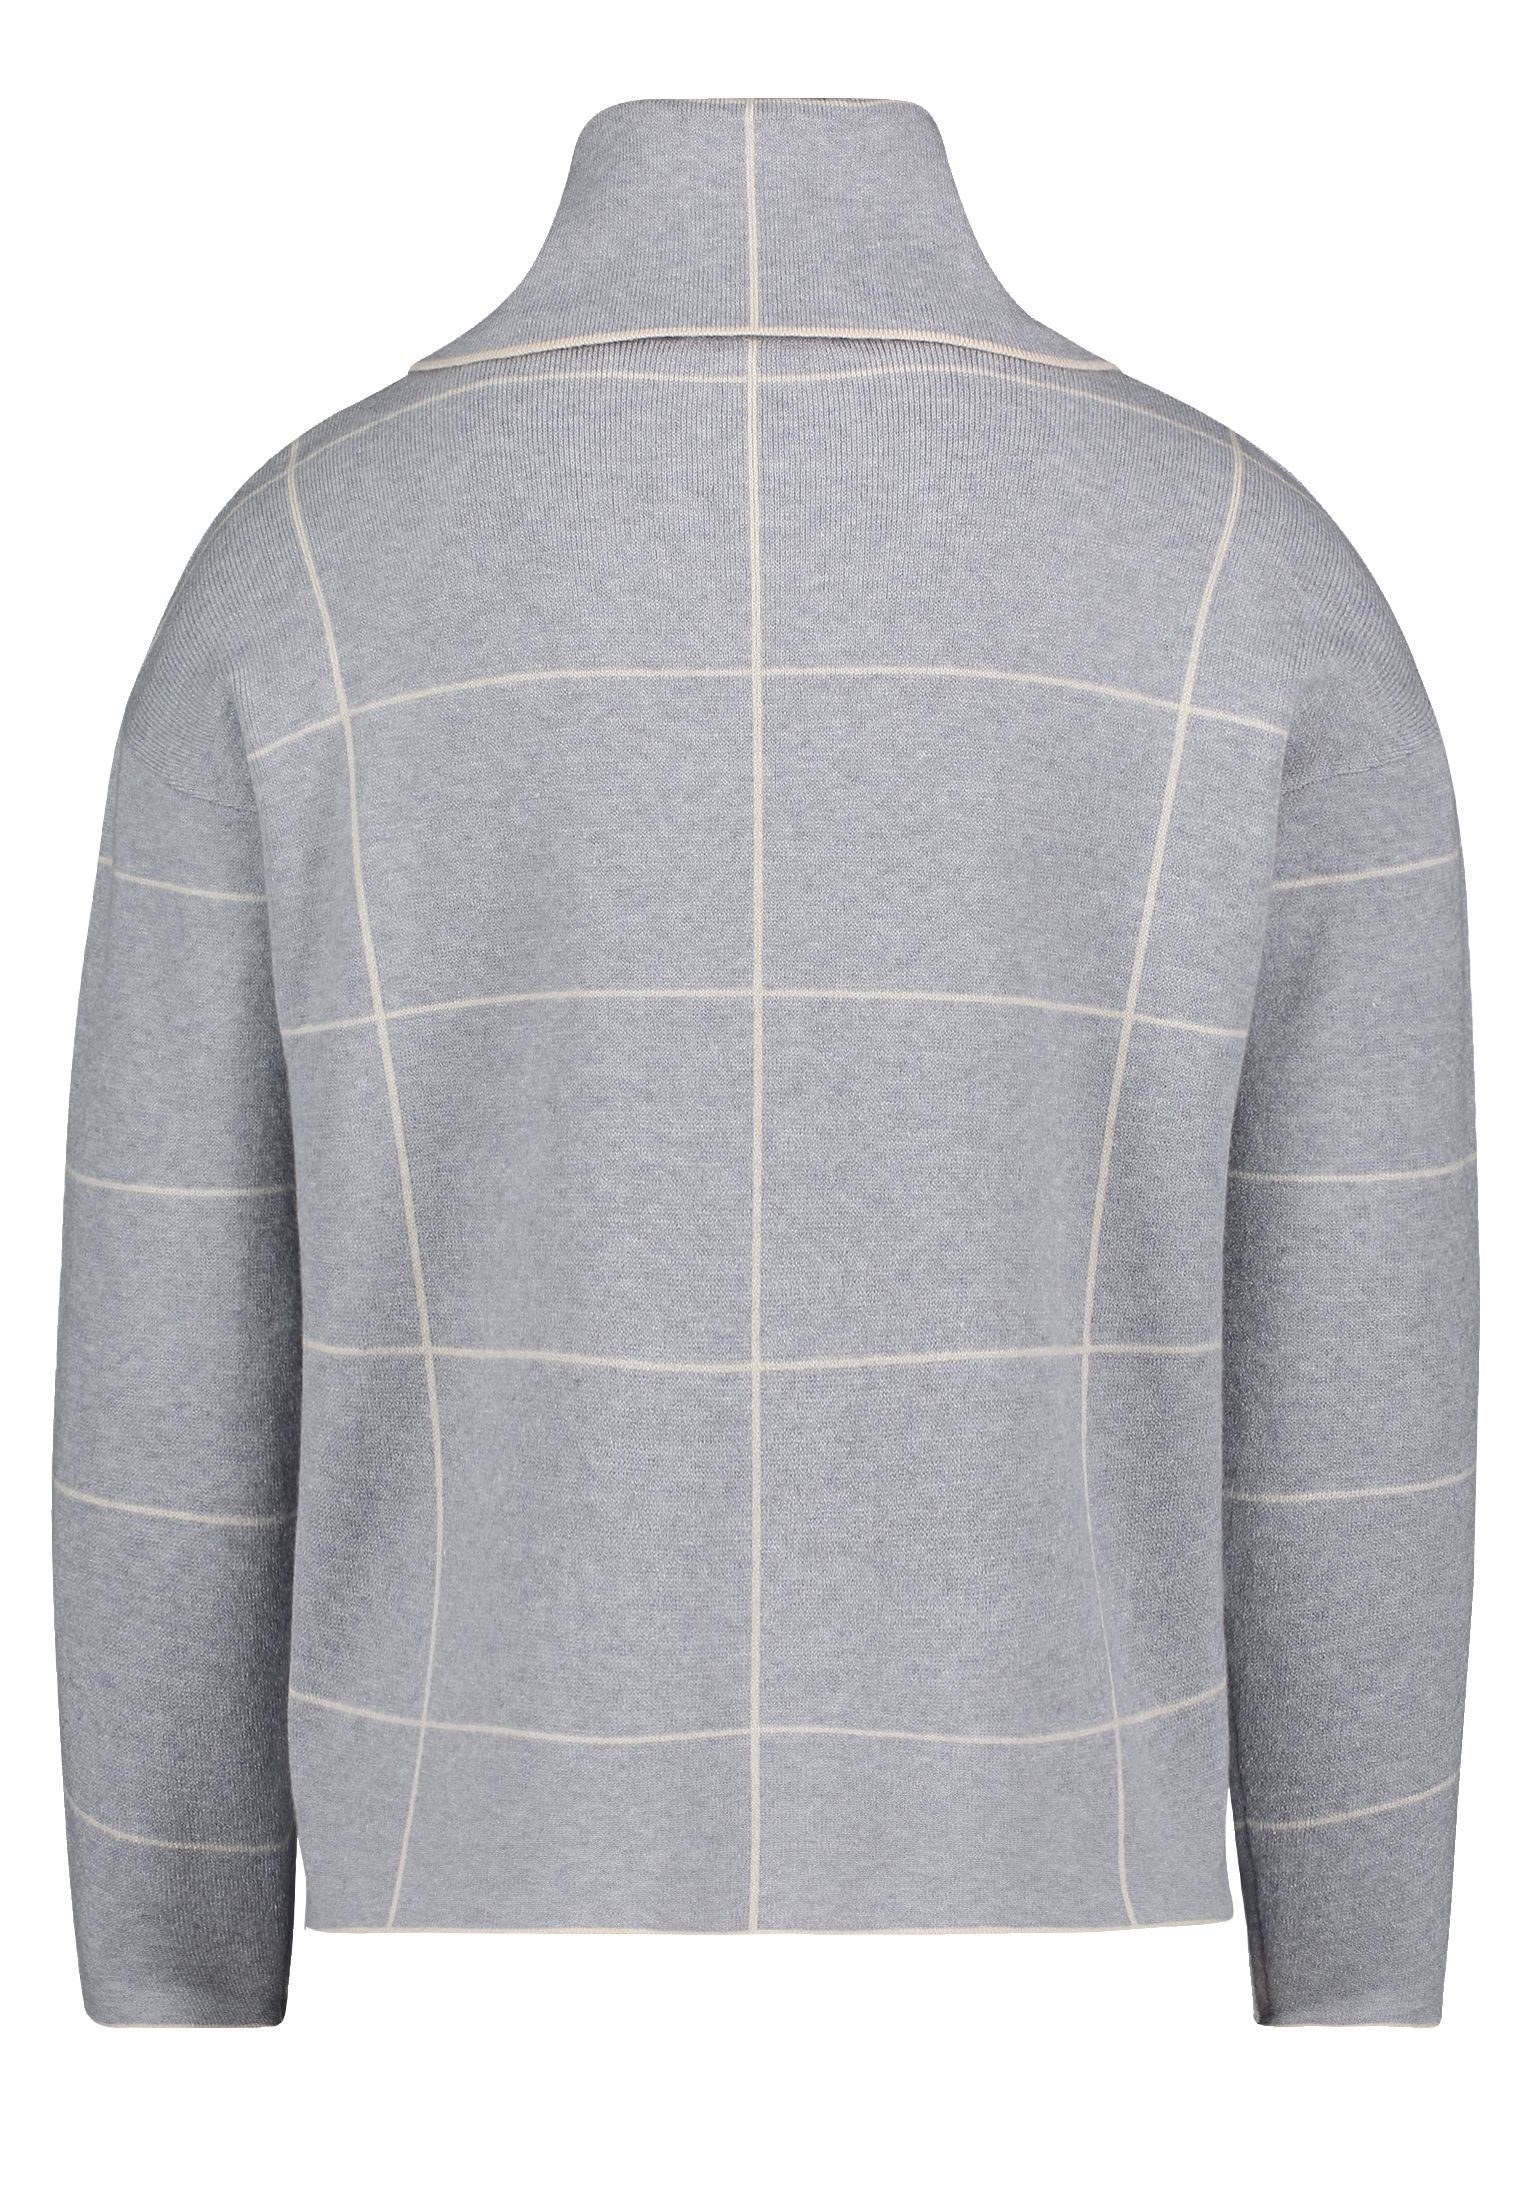 Barclay Strickpullover grey/beige patch Betty